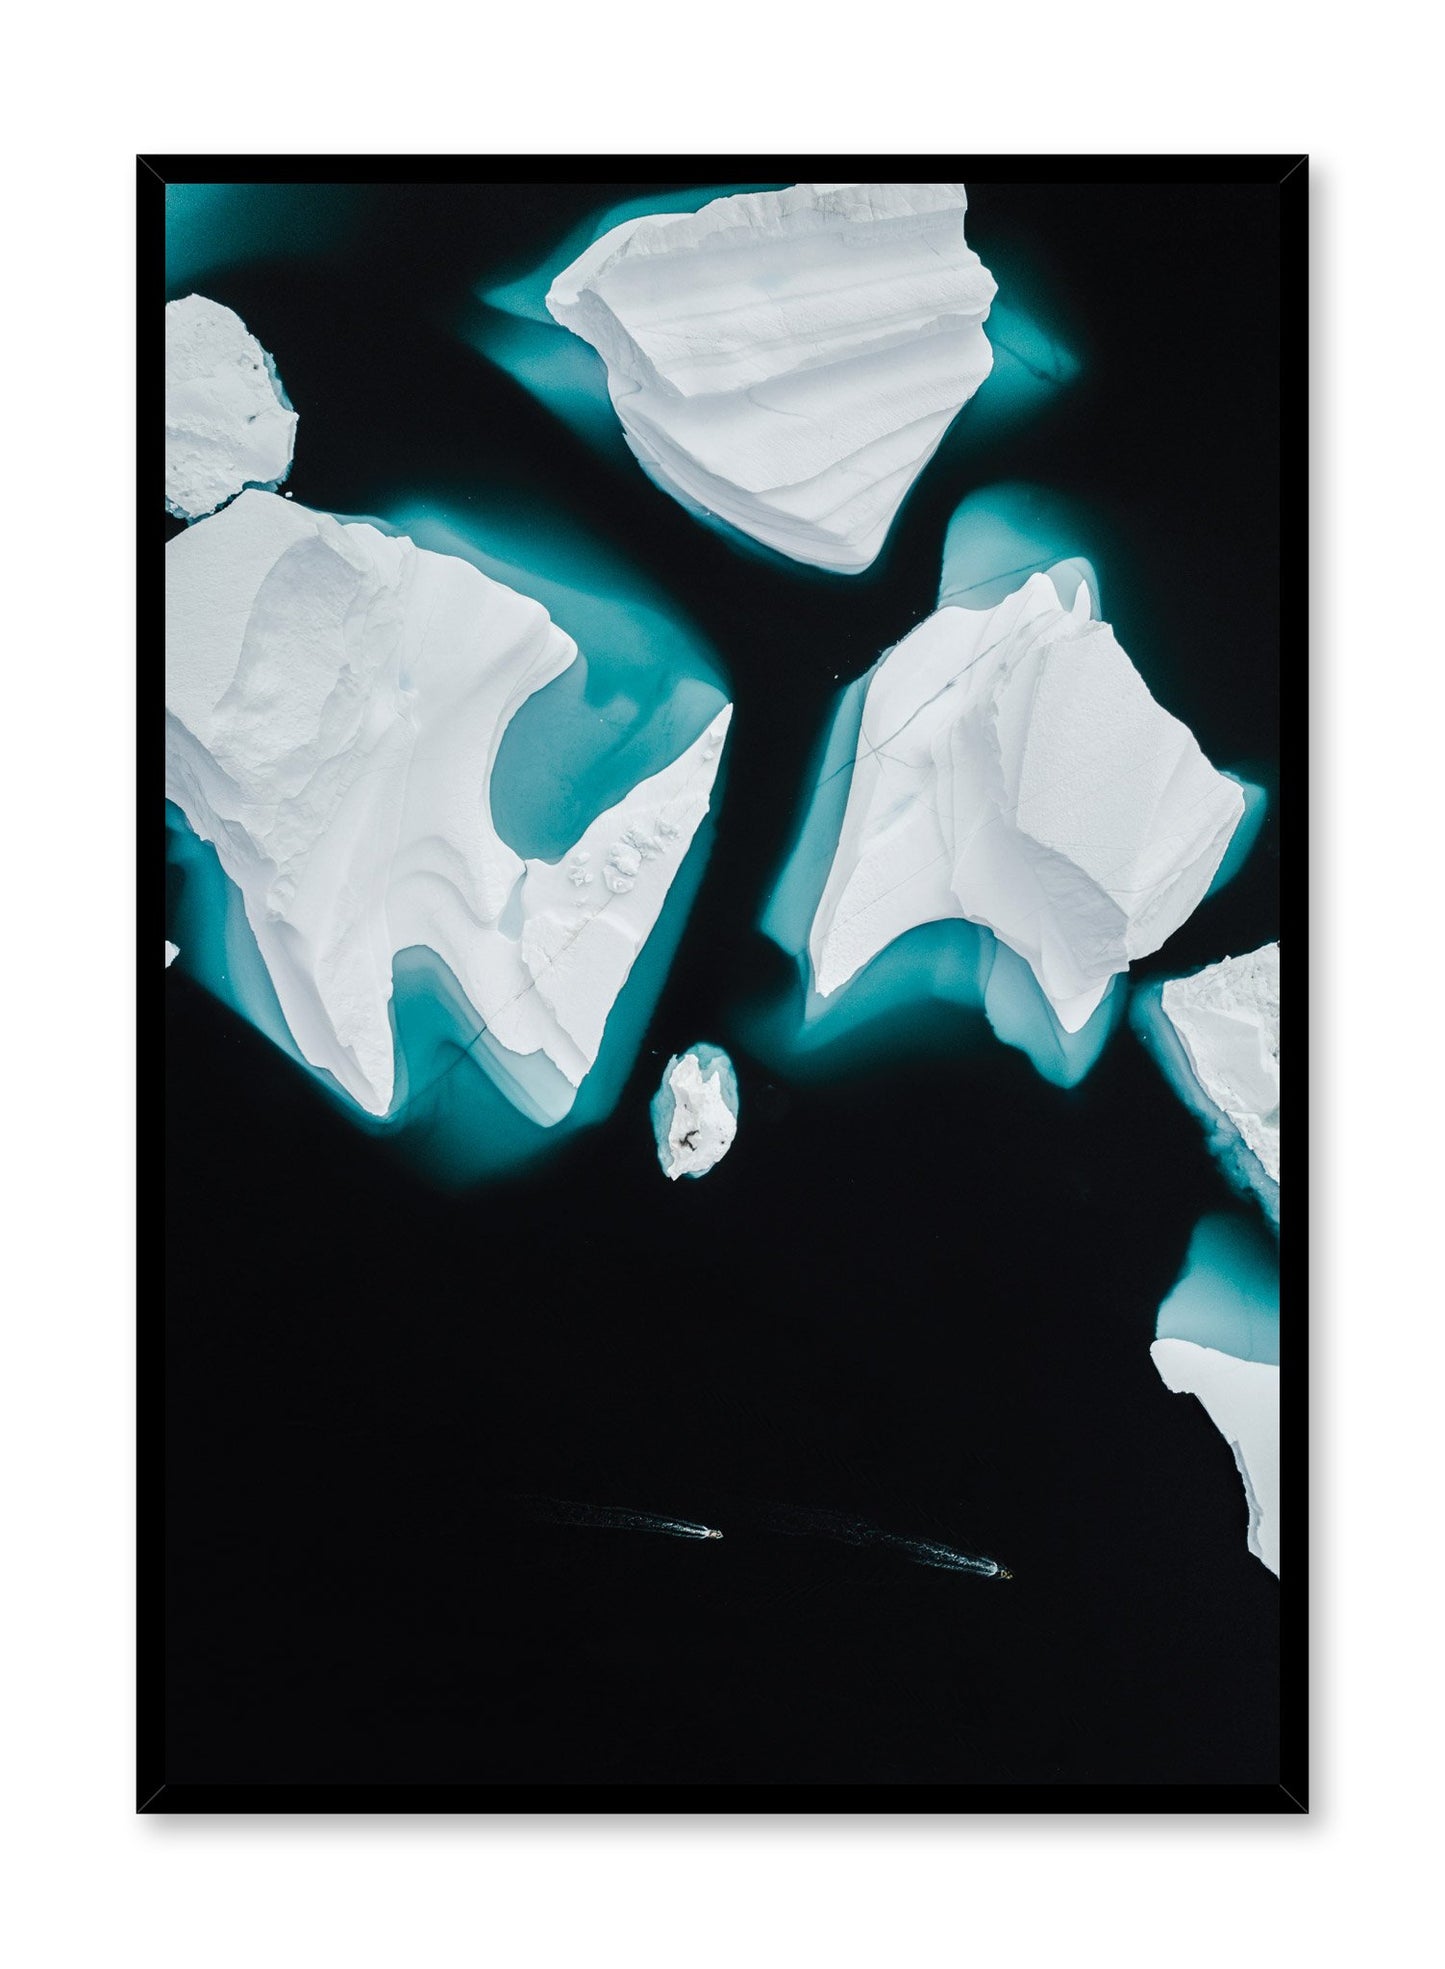 Modern minimalist poster by Opposite Wall with iceberg photography